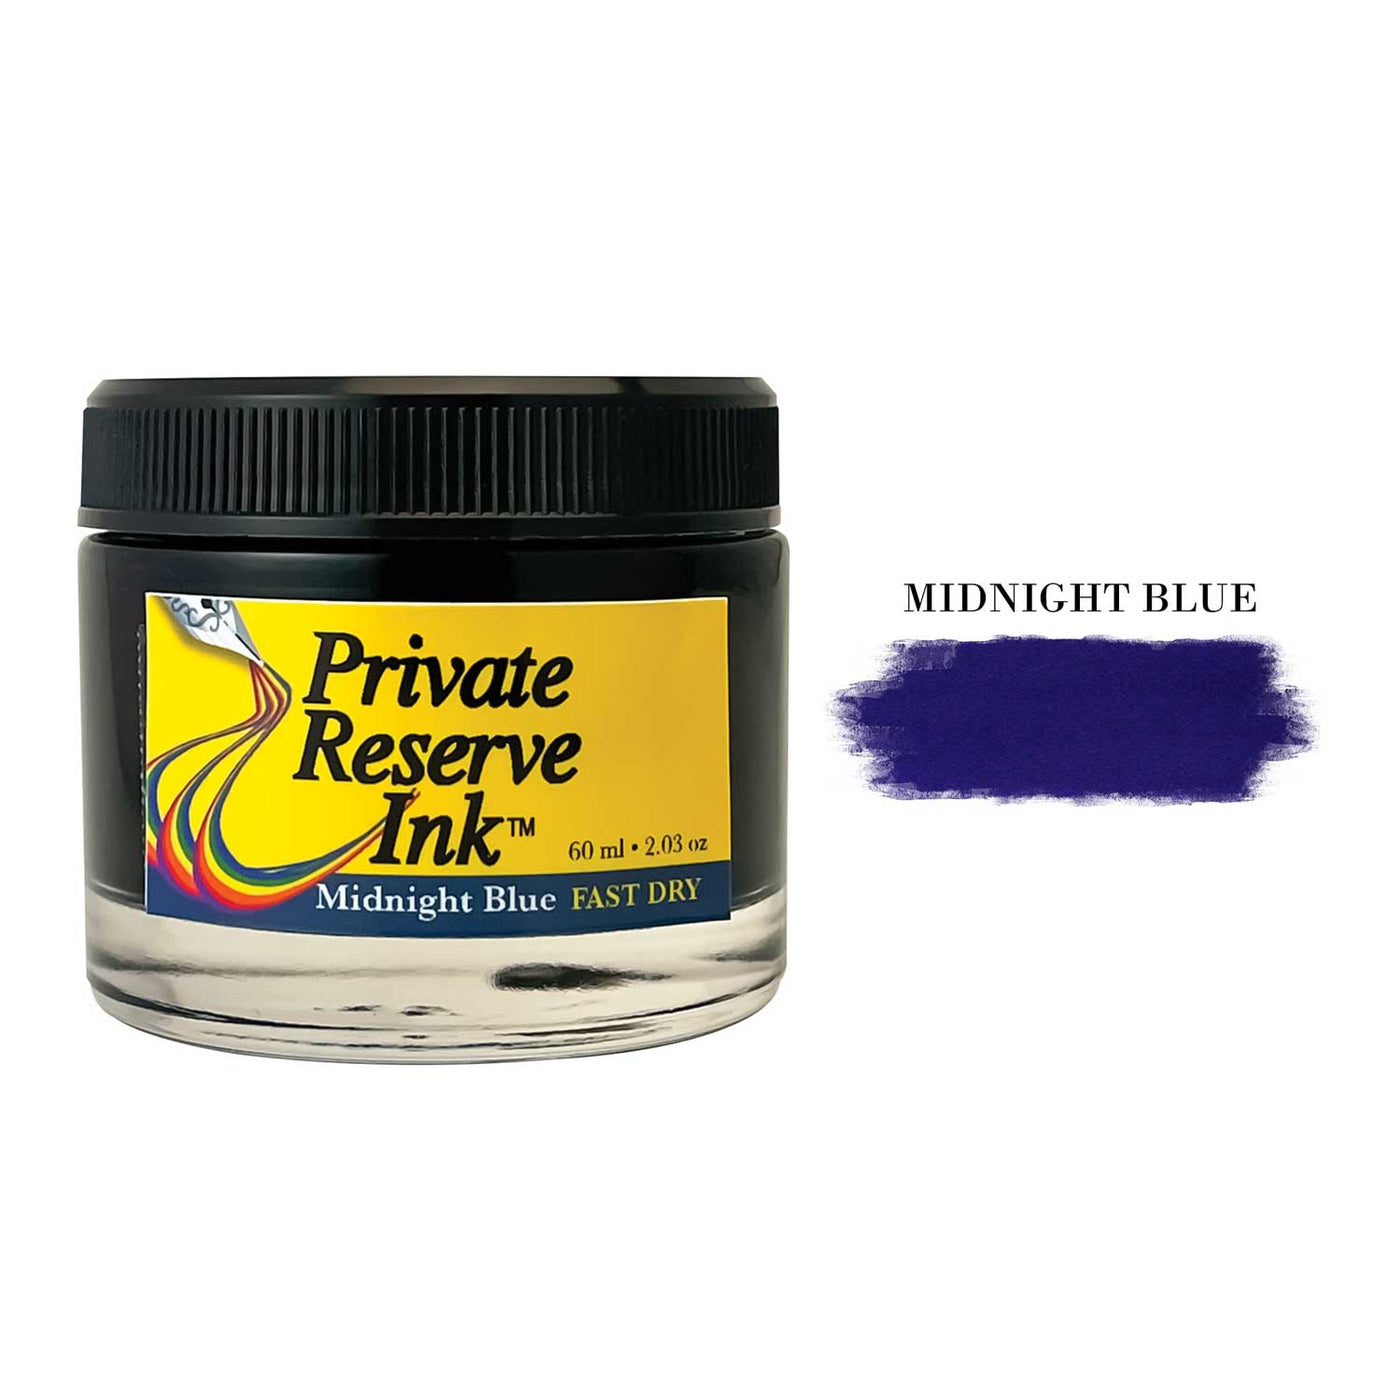 Private Reserve Midnight Blue Fast Dry Ink Bottle - 60ml 1